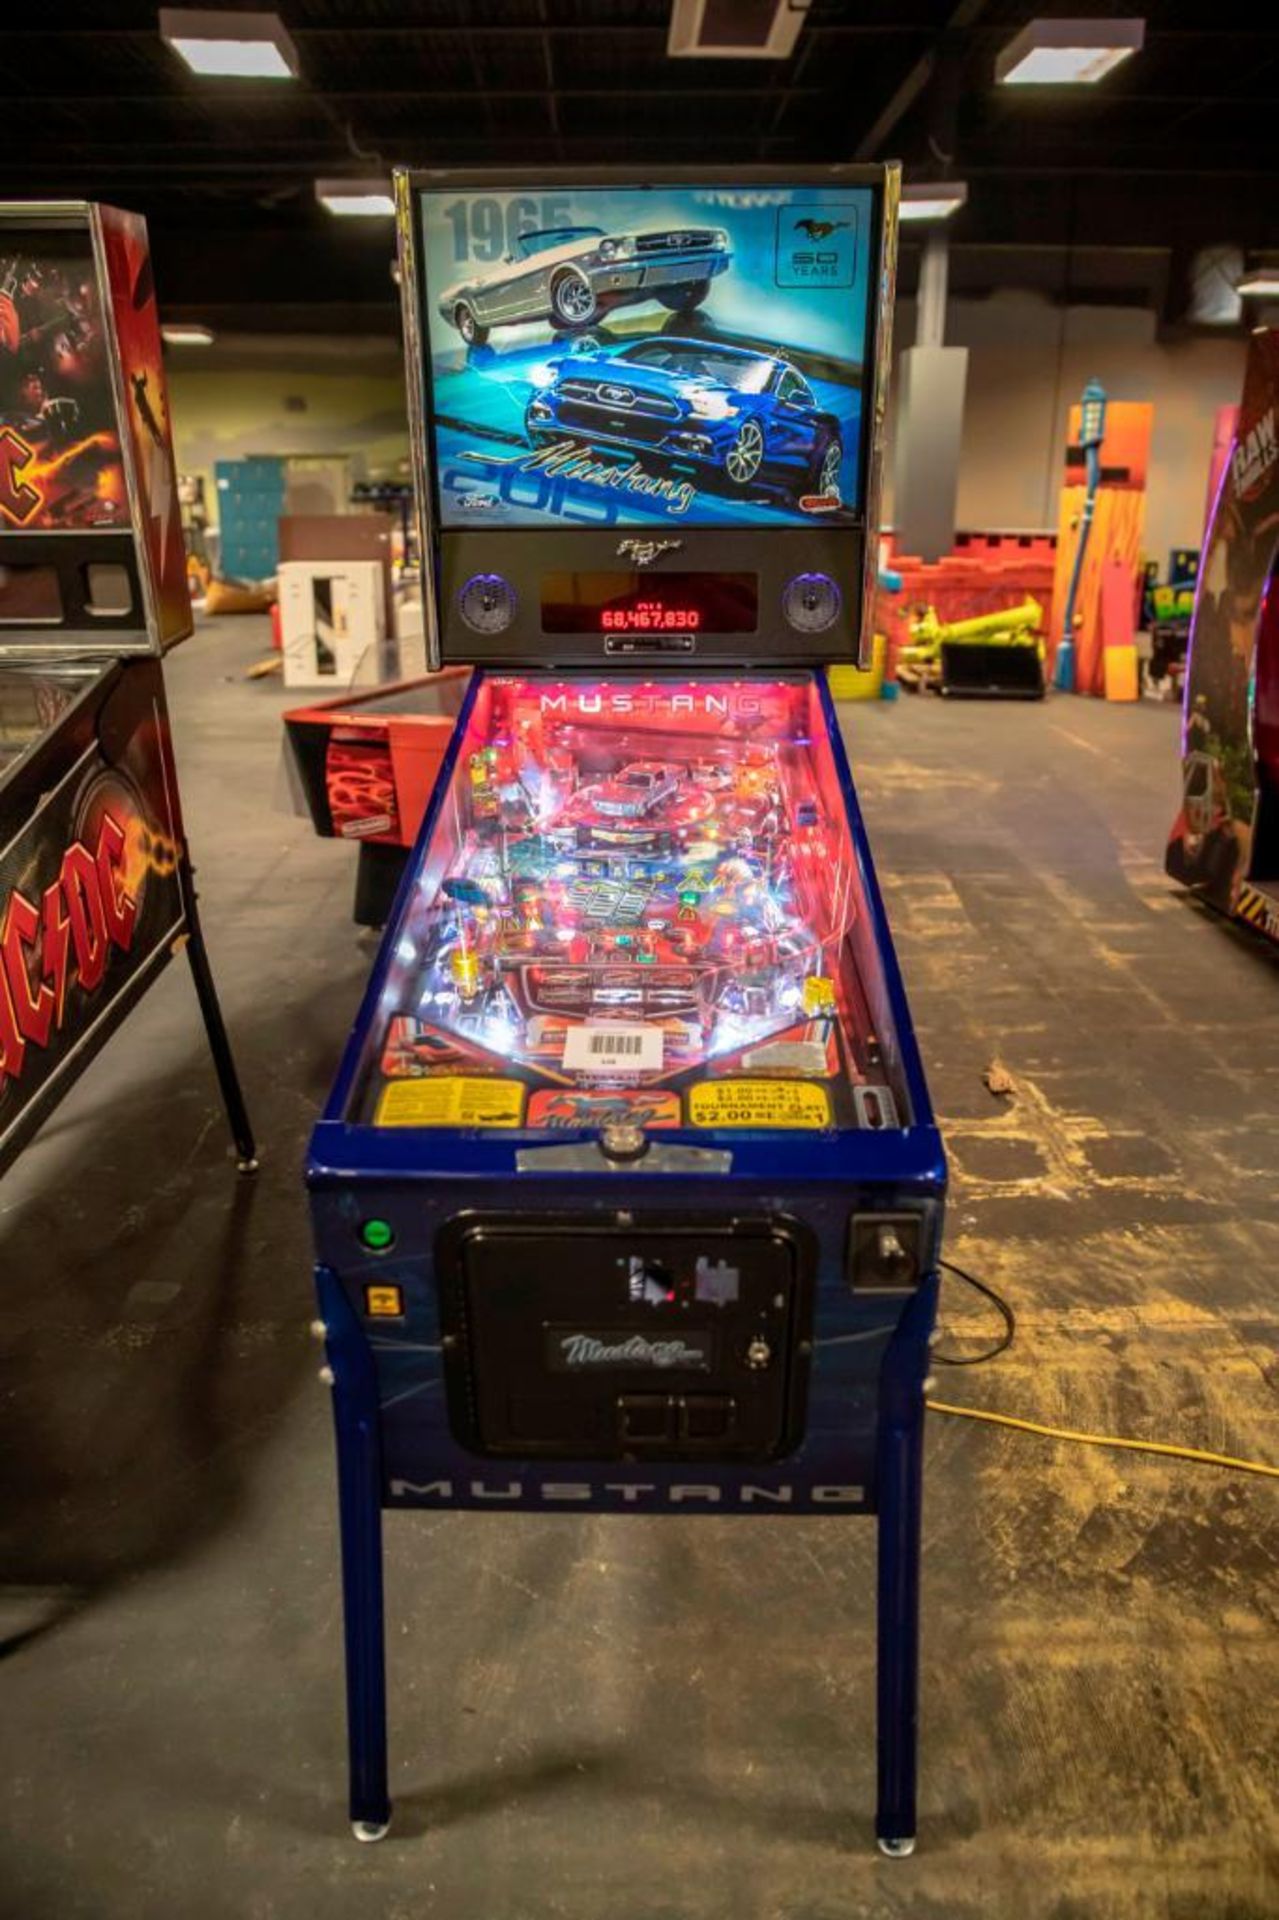 Limited Edition #12 Stern Mustang Pinball - Functional. Used, shows commercial use. See pictures.